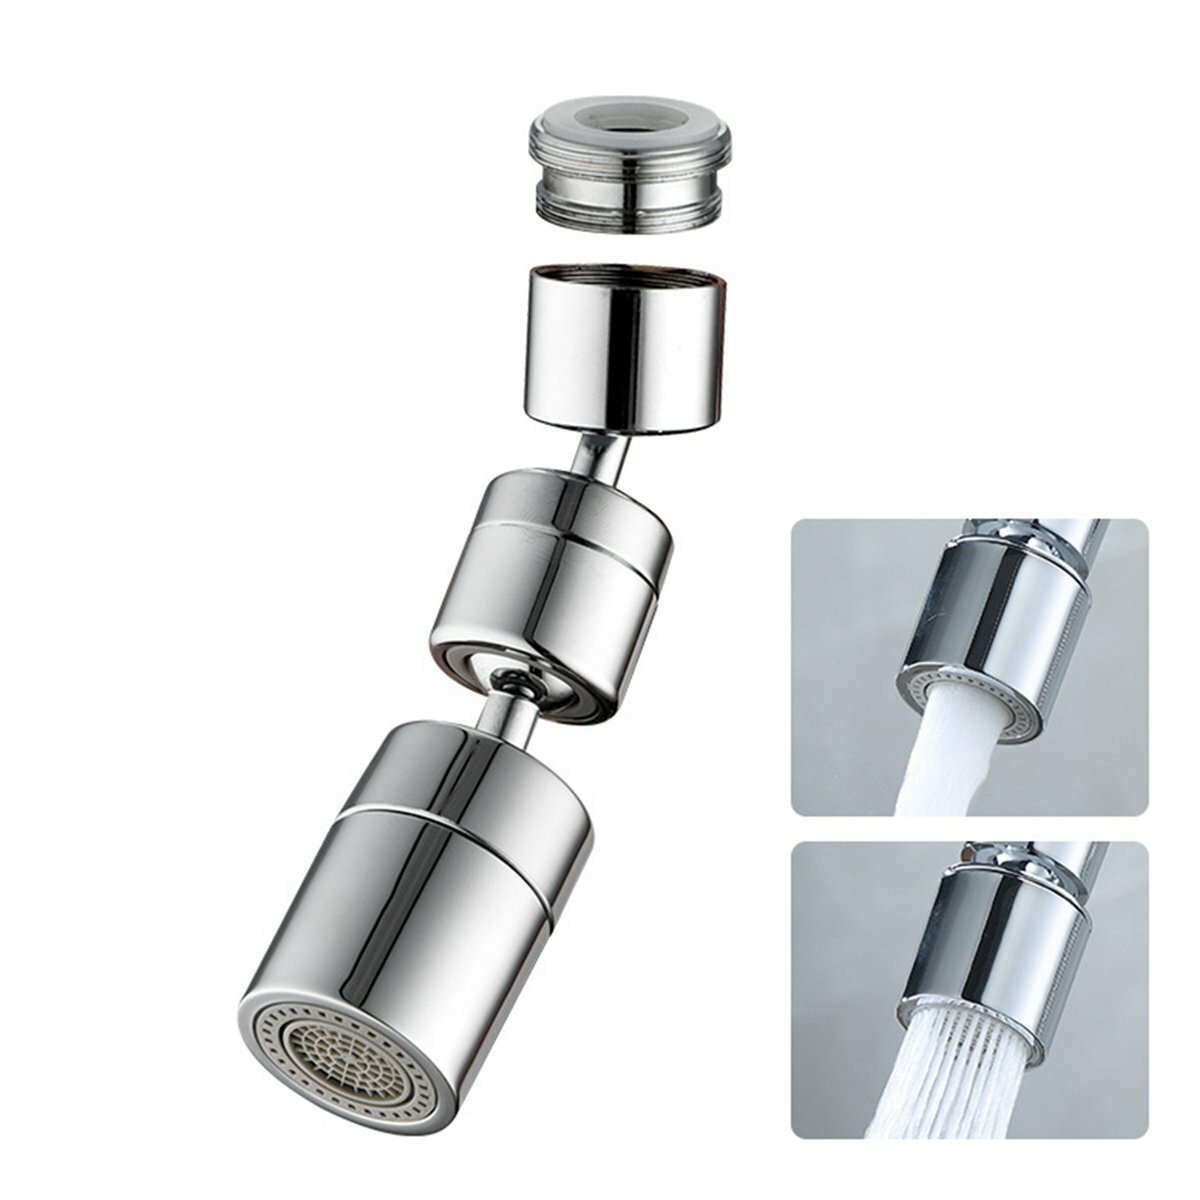 Universal Extender Splash Filter Faucet 1080? Rotate Water Outlet Faucet Silver